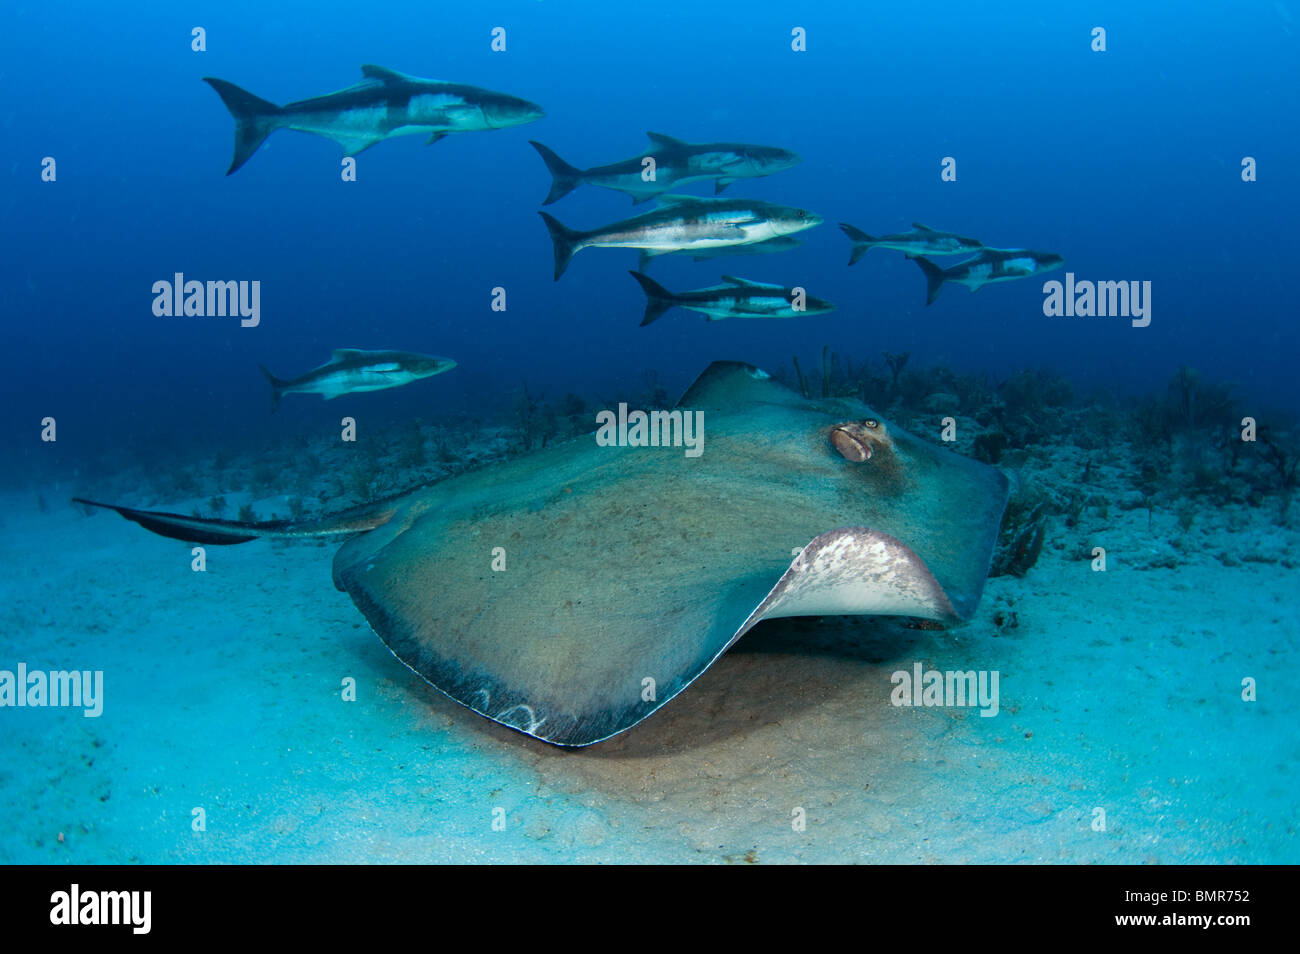 Large Roughtail Stingray (asyatis centroura) followed by a school of Cobia (Rachycentron canadum) in Palm Beach, FL. Stock Photo